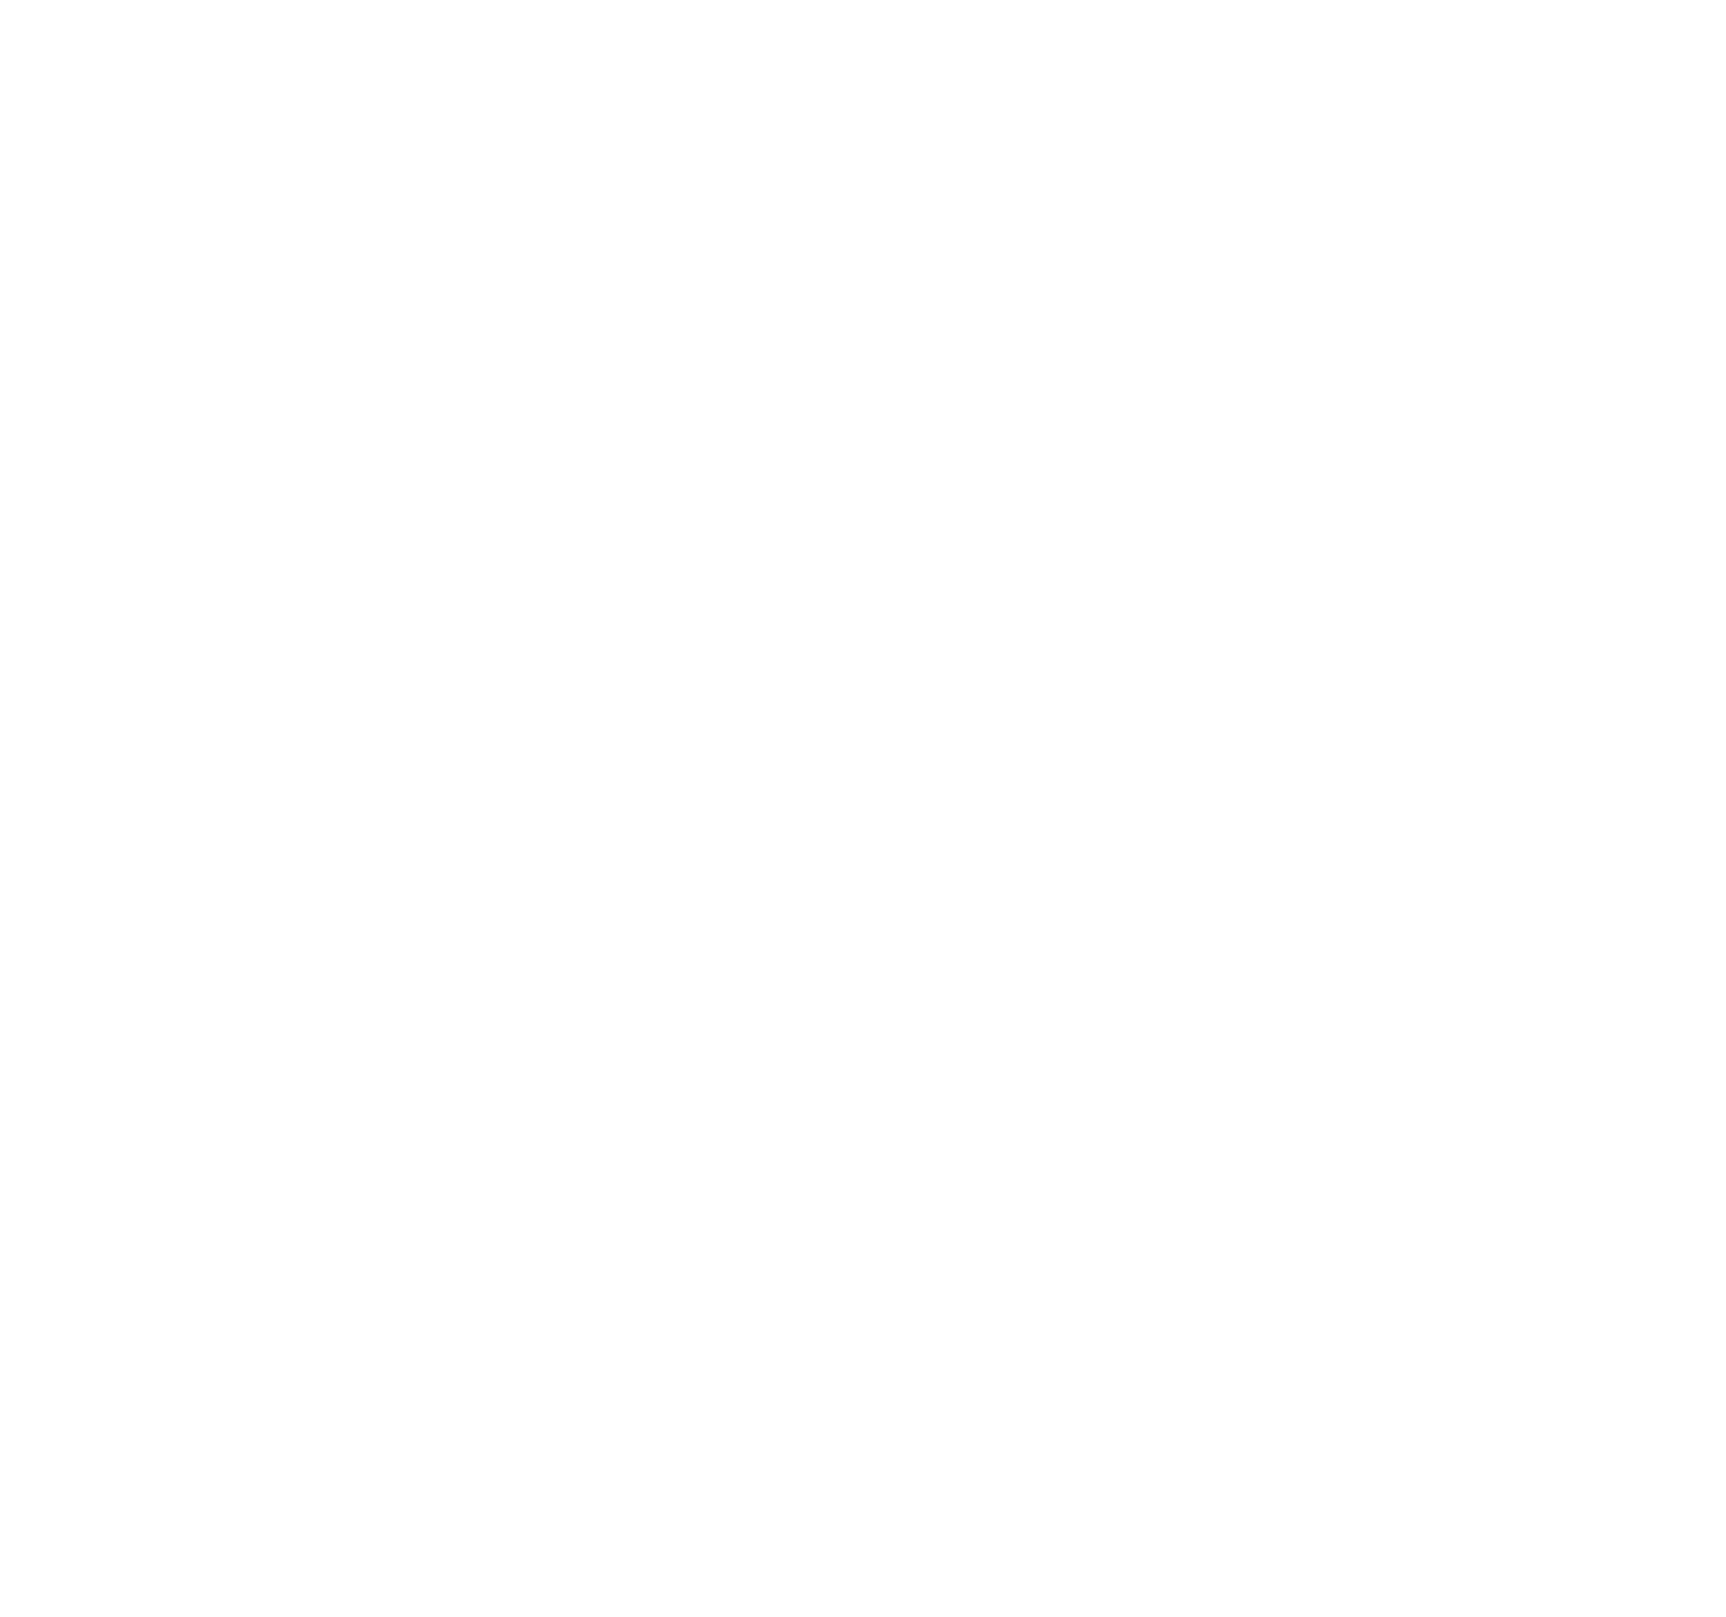 Live Wire Athens